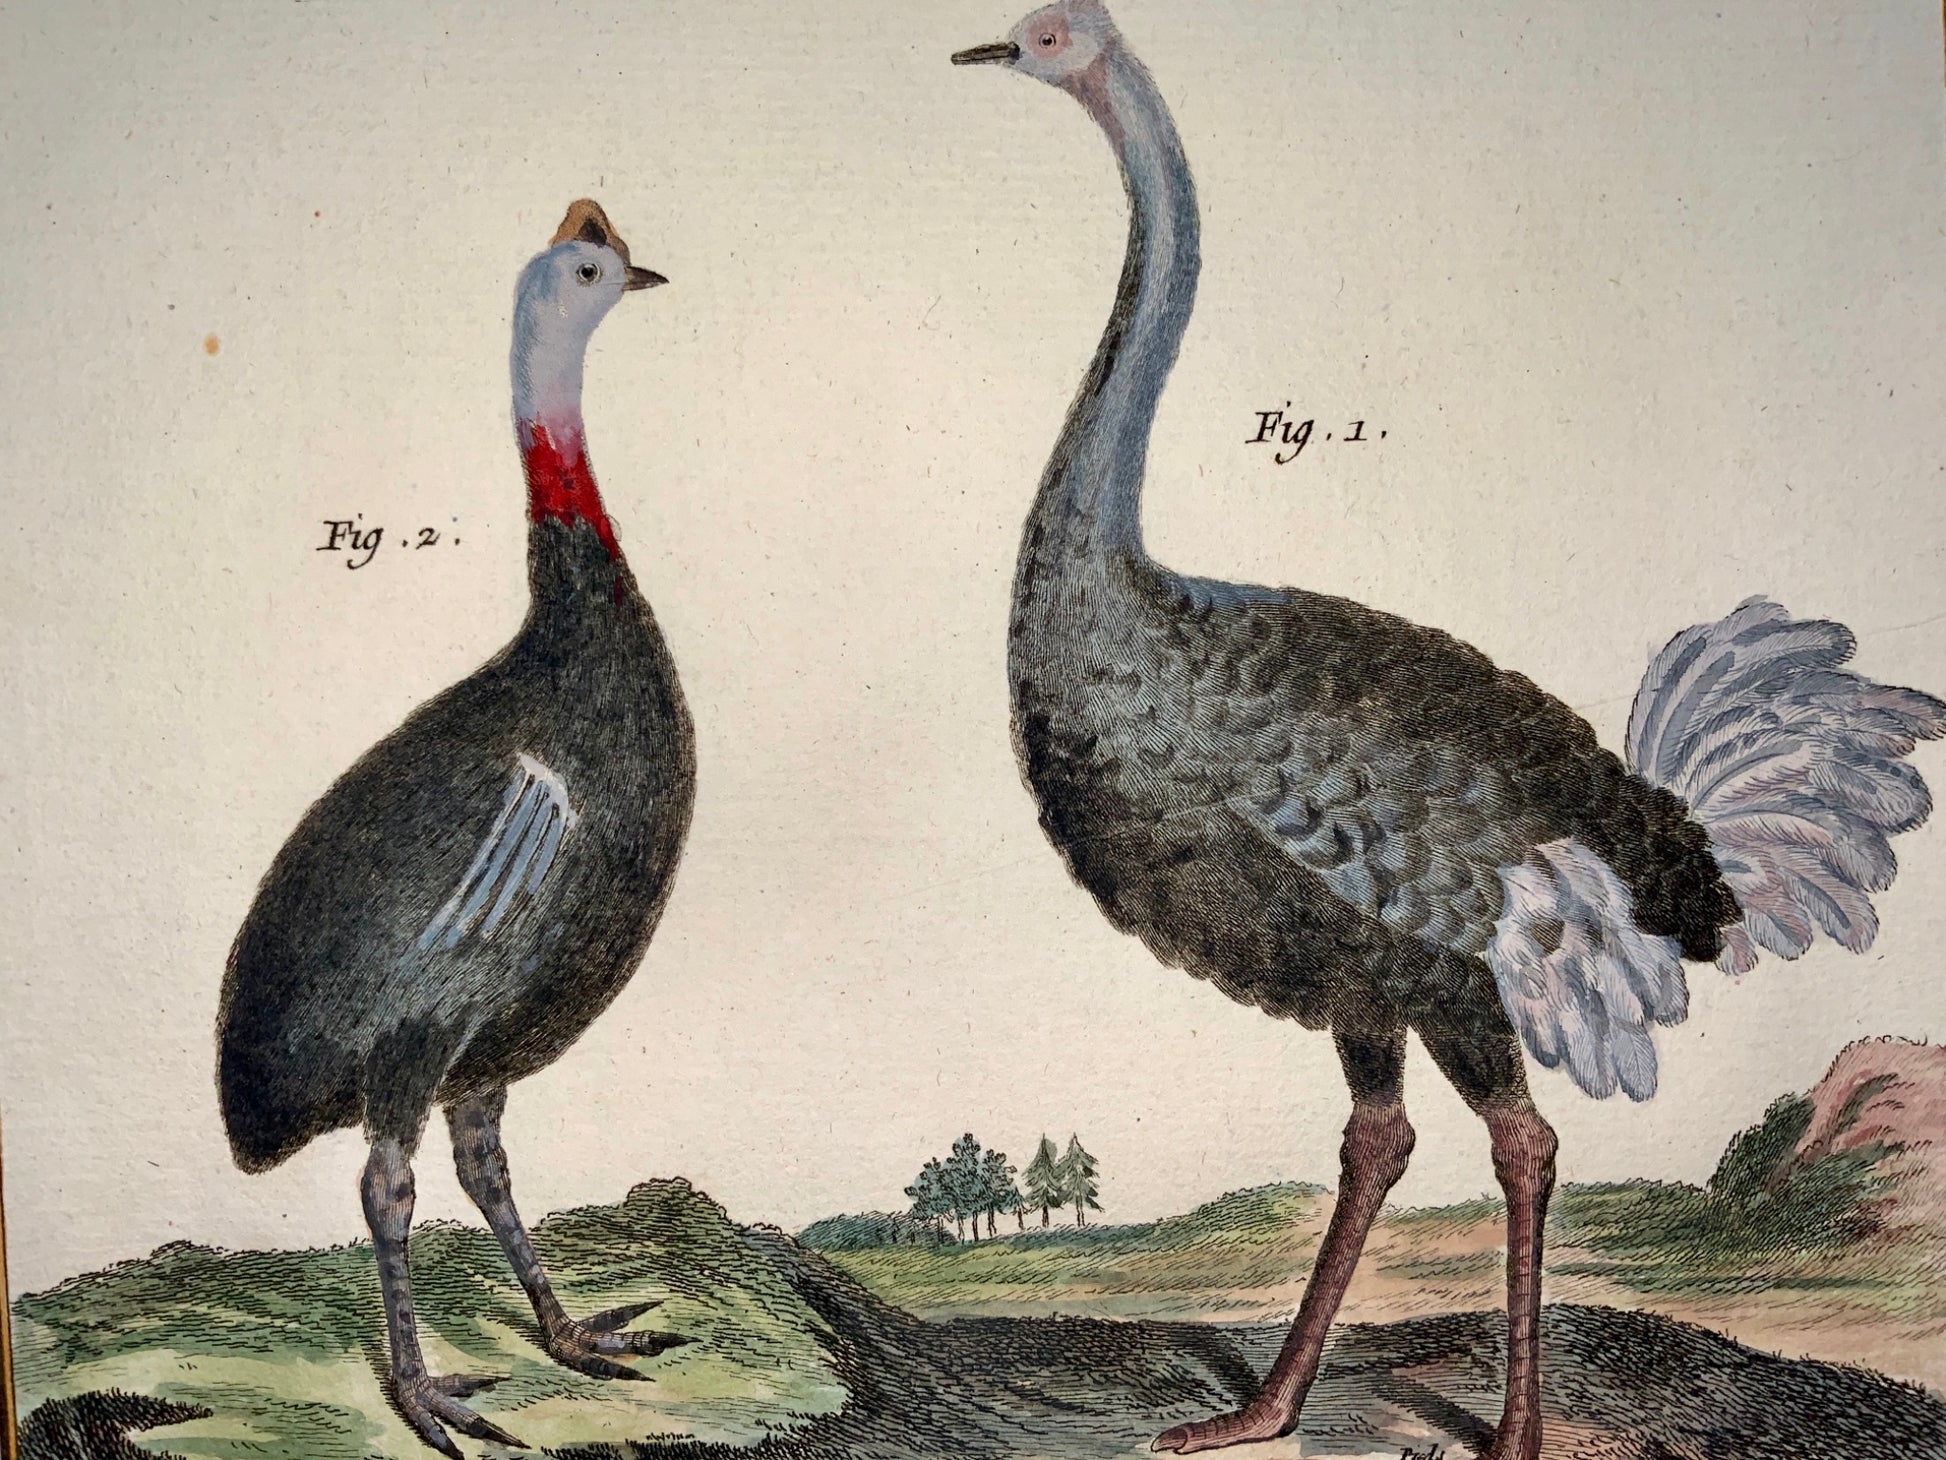 1780 Martinet - PELICAN FLAMINGO OSTRICH - hand coloured 38 cm engraving - Ornithology